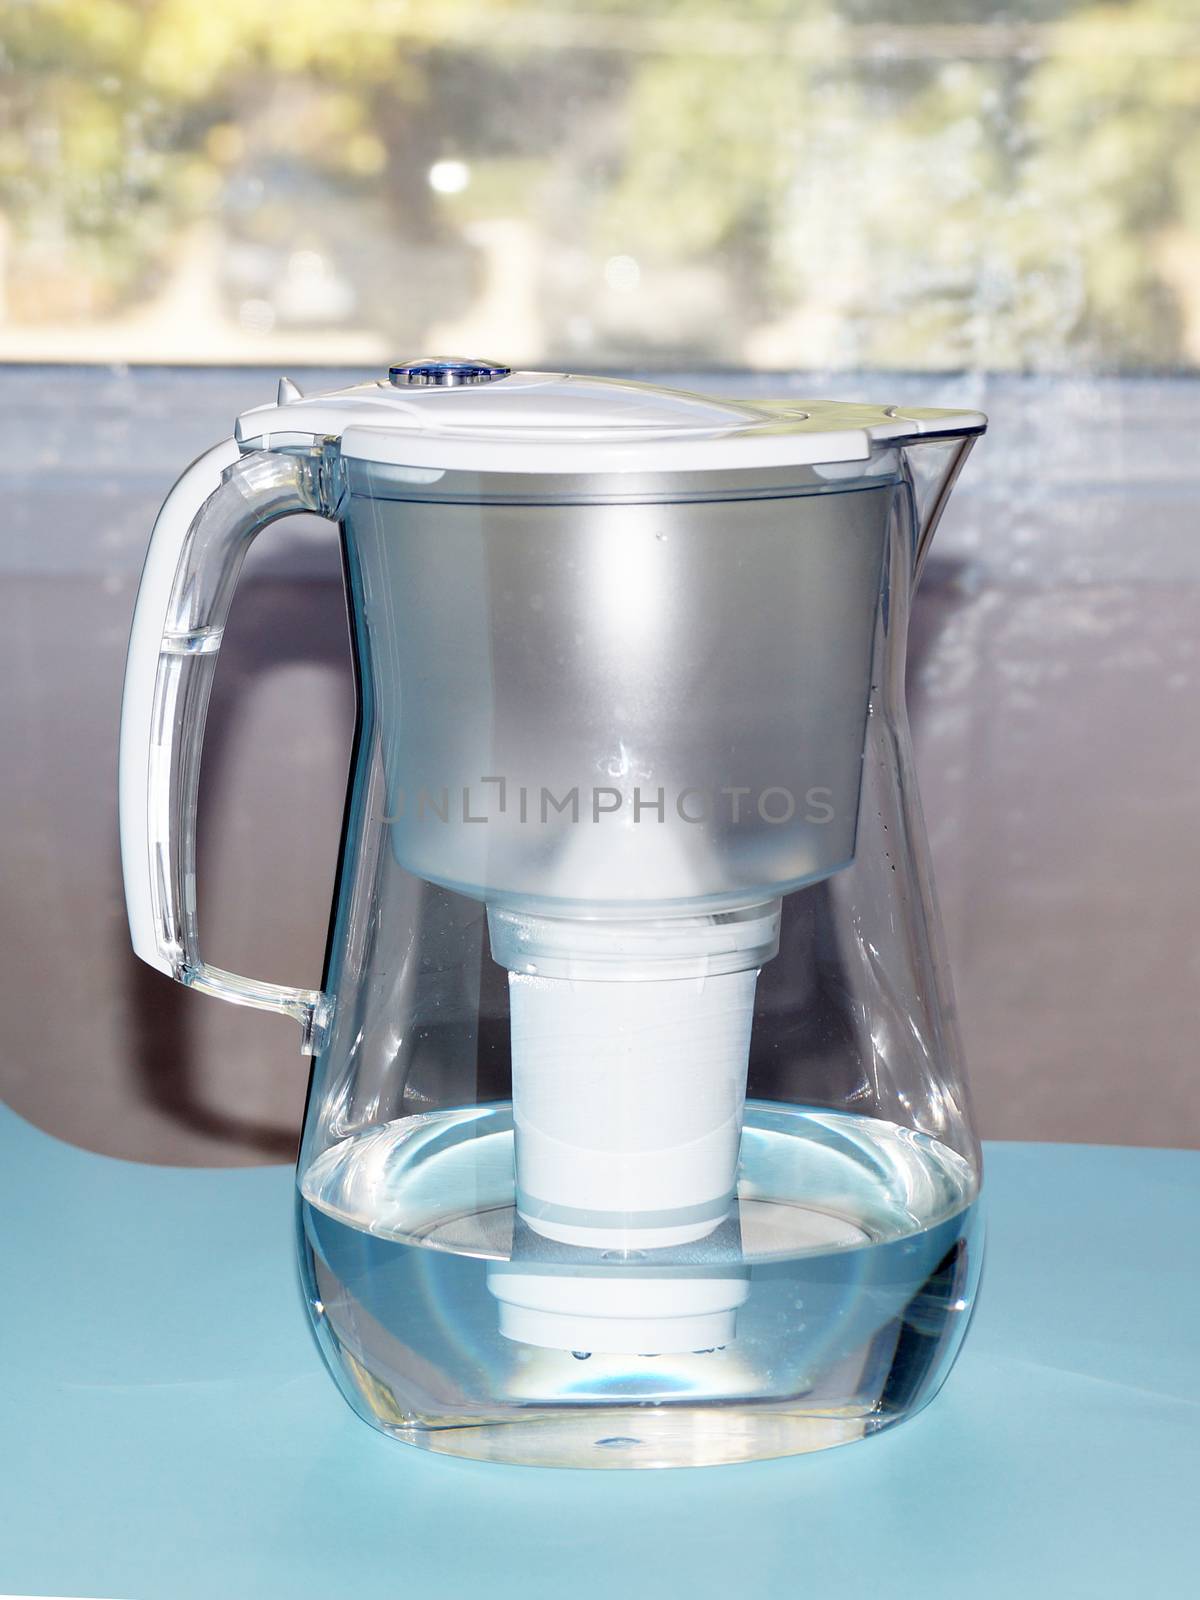 a jug for filtering water against the background of the window